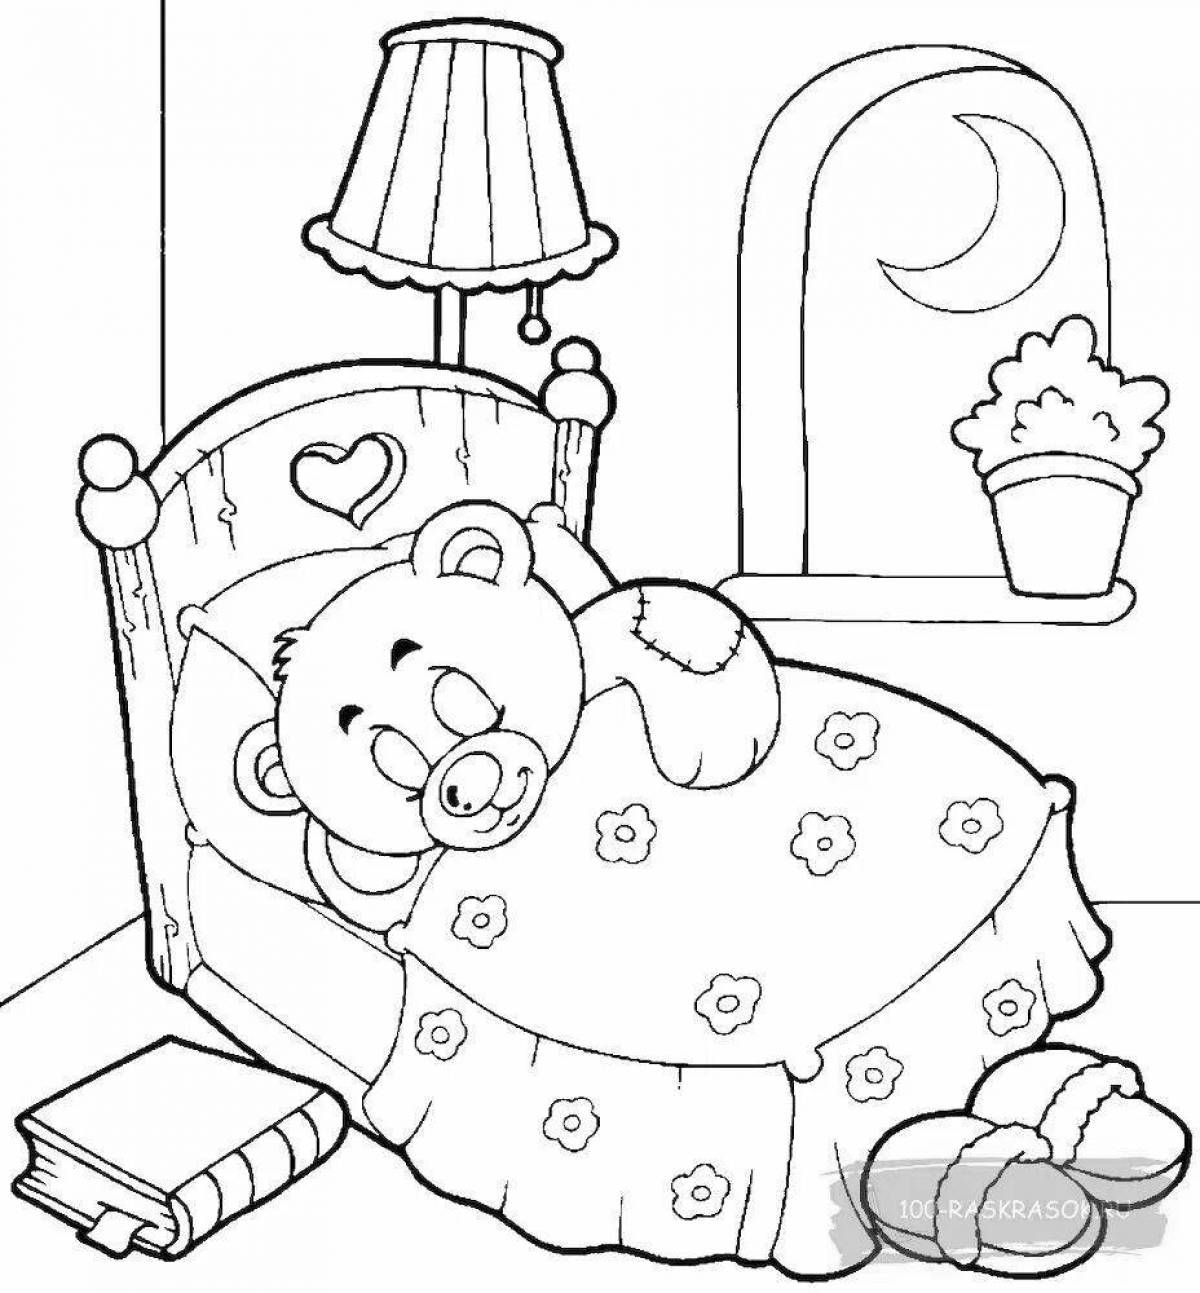 A wonderful coloring book for a baby bed